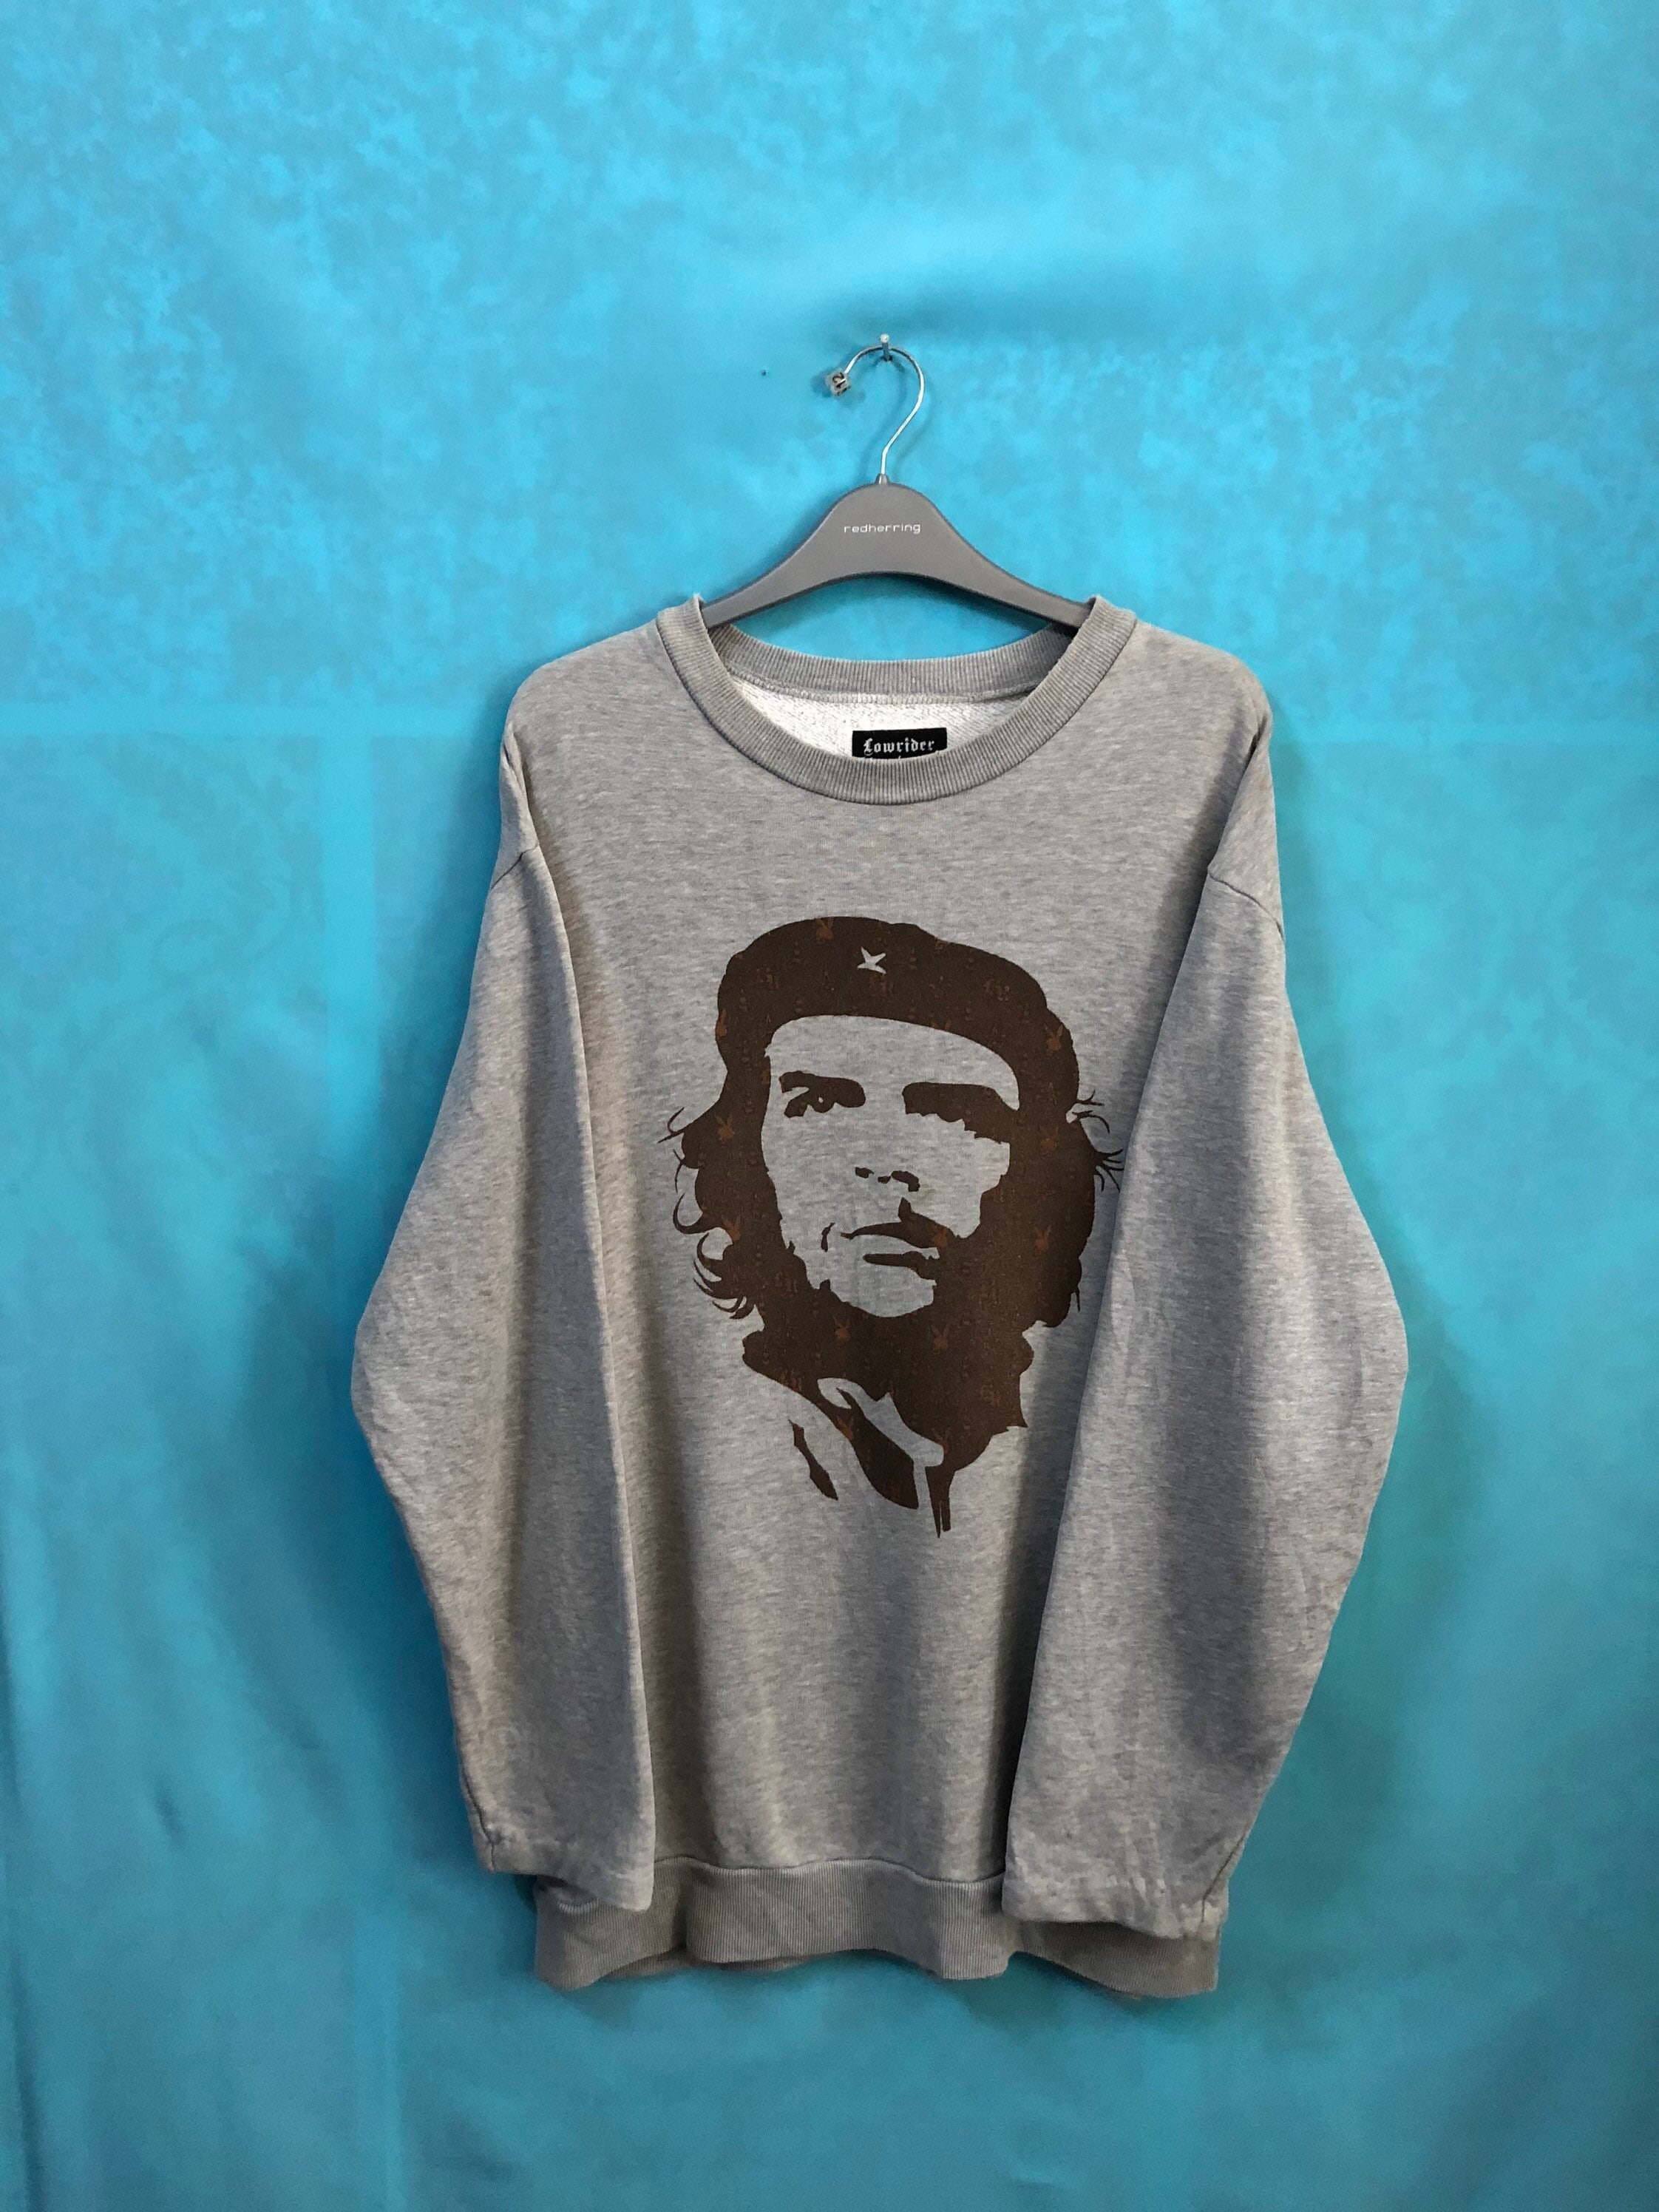 Pino and Che Guevara iconic shirt, hoodie, sweater, long sleeve and tank top